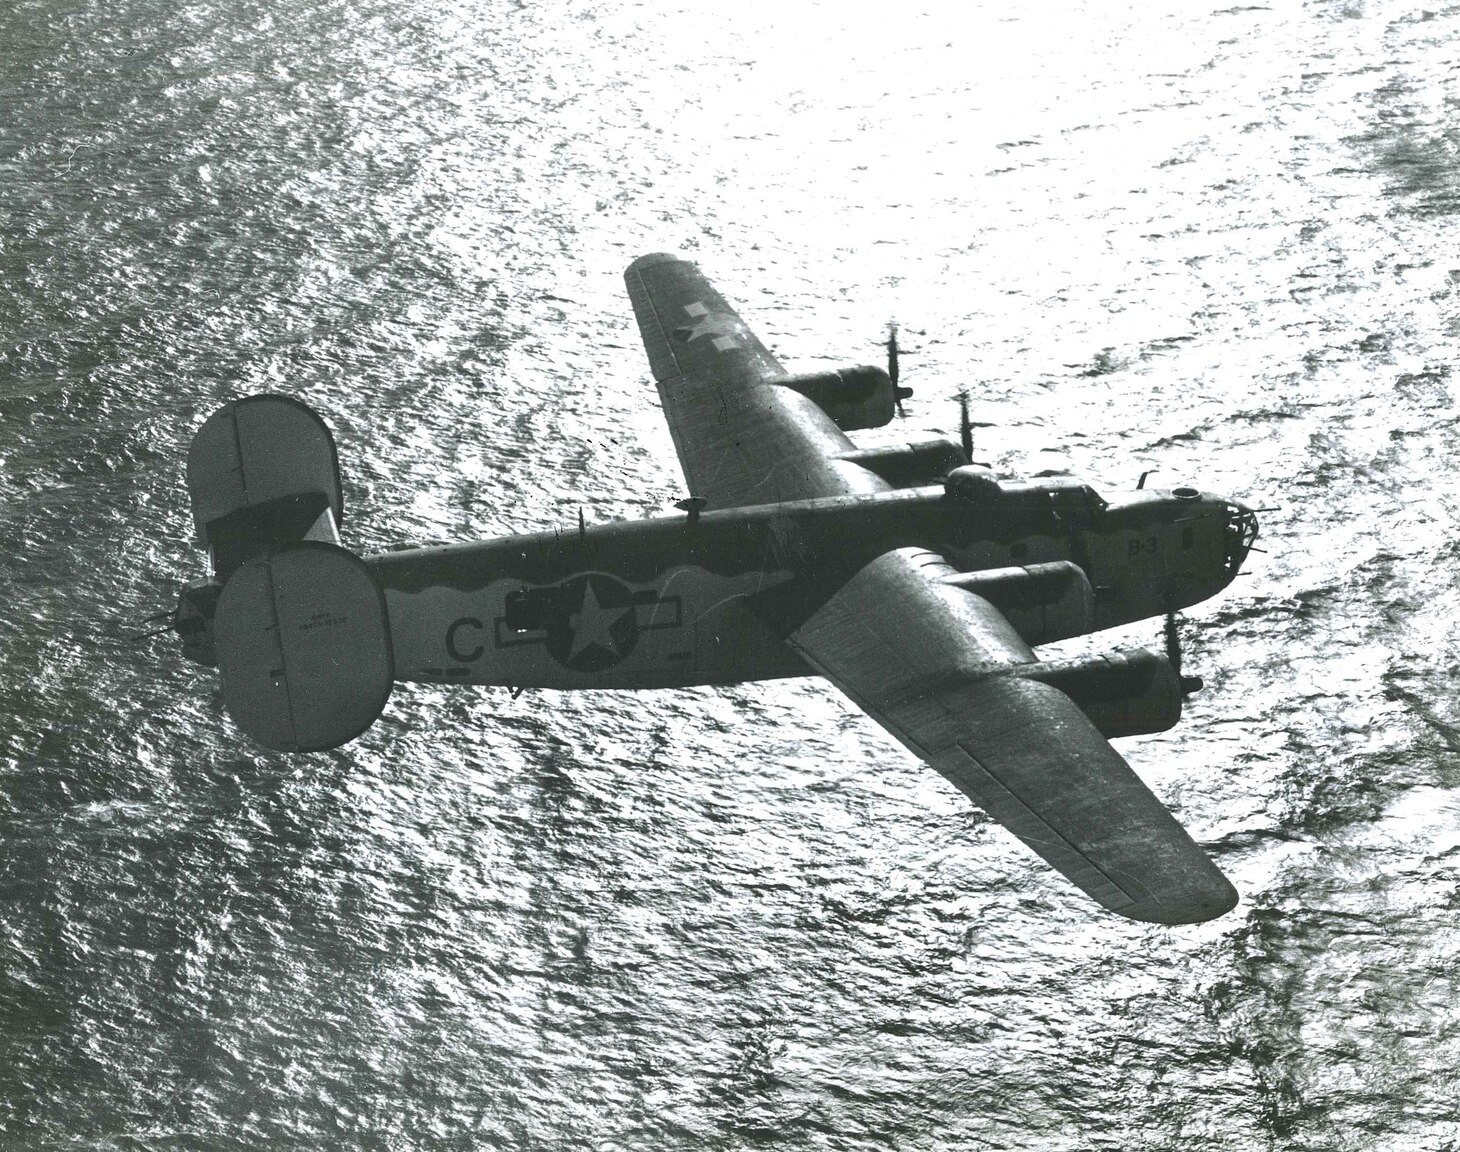 The crisp, clear black- and white-photograph of a PB4Y-1 “Liberator” airplane viewed from its starboard side, flying over the Bay of Biscay in November 1943